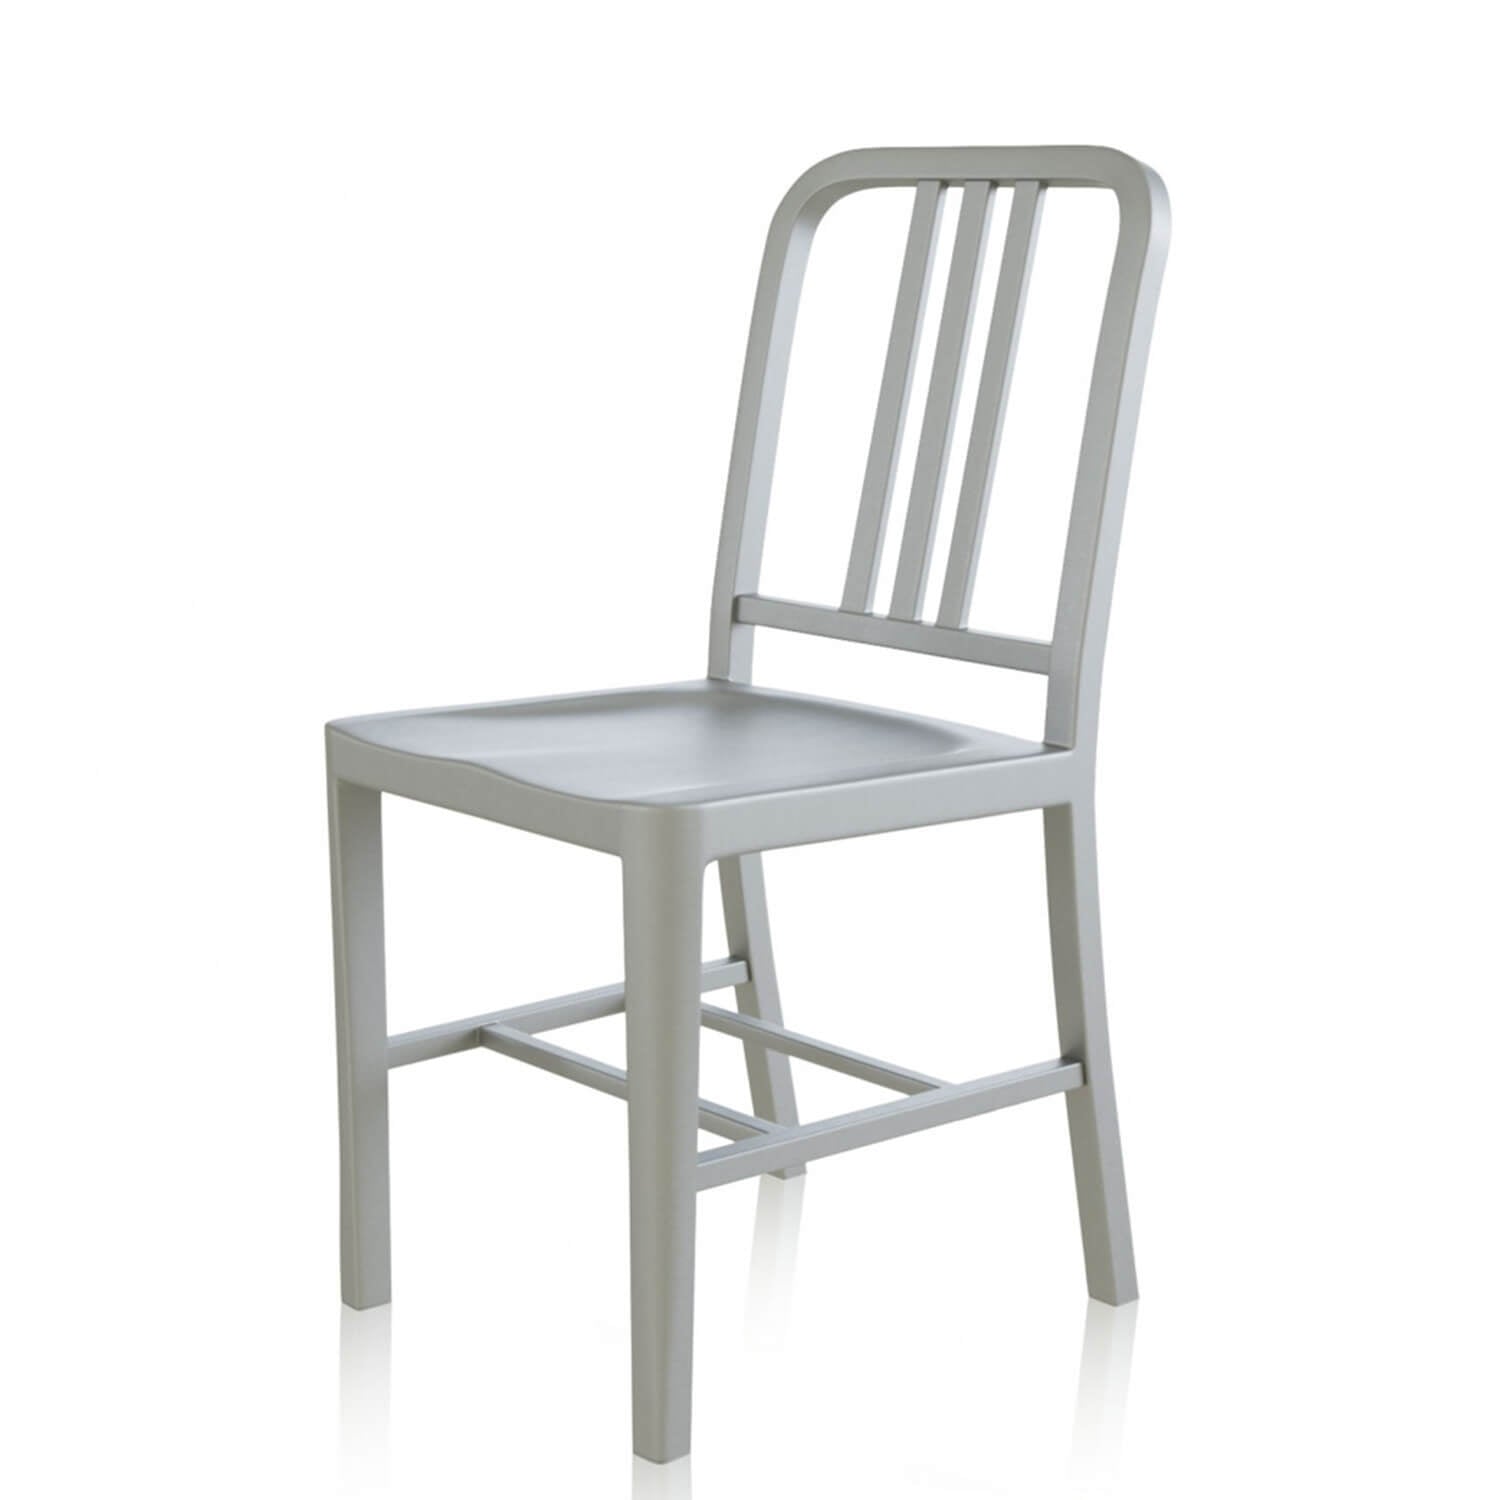 Apere dining chair